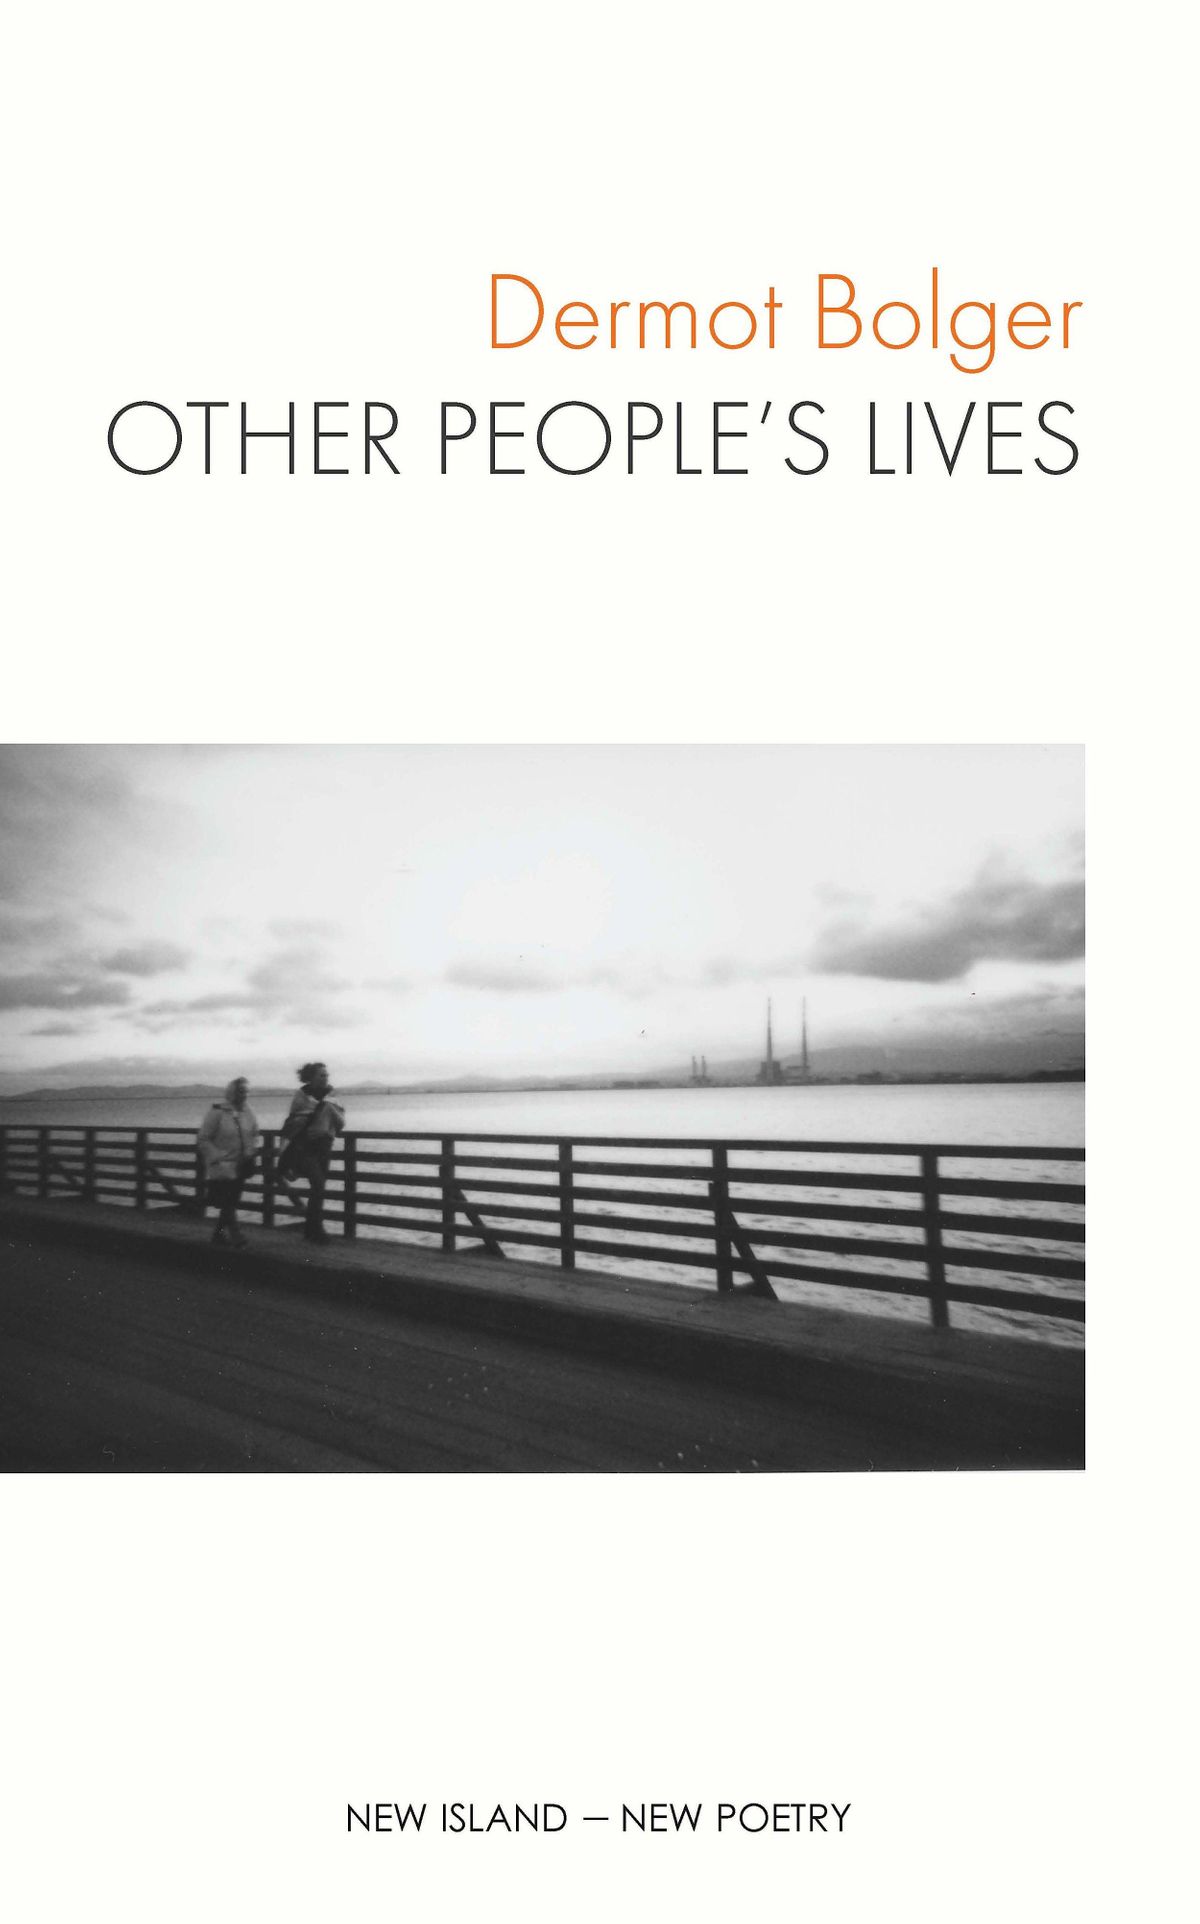 Other People's Lives: History and Poetry with Dermot Bolger